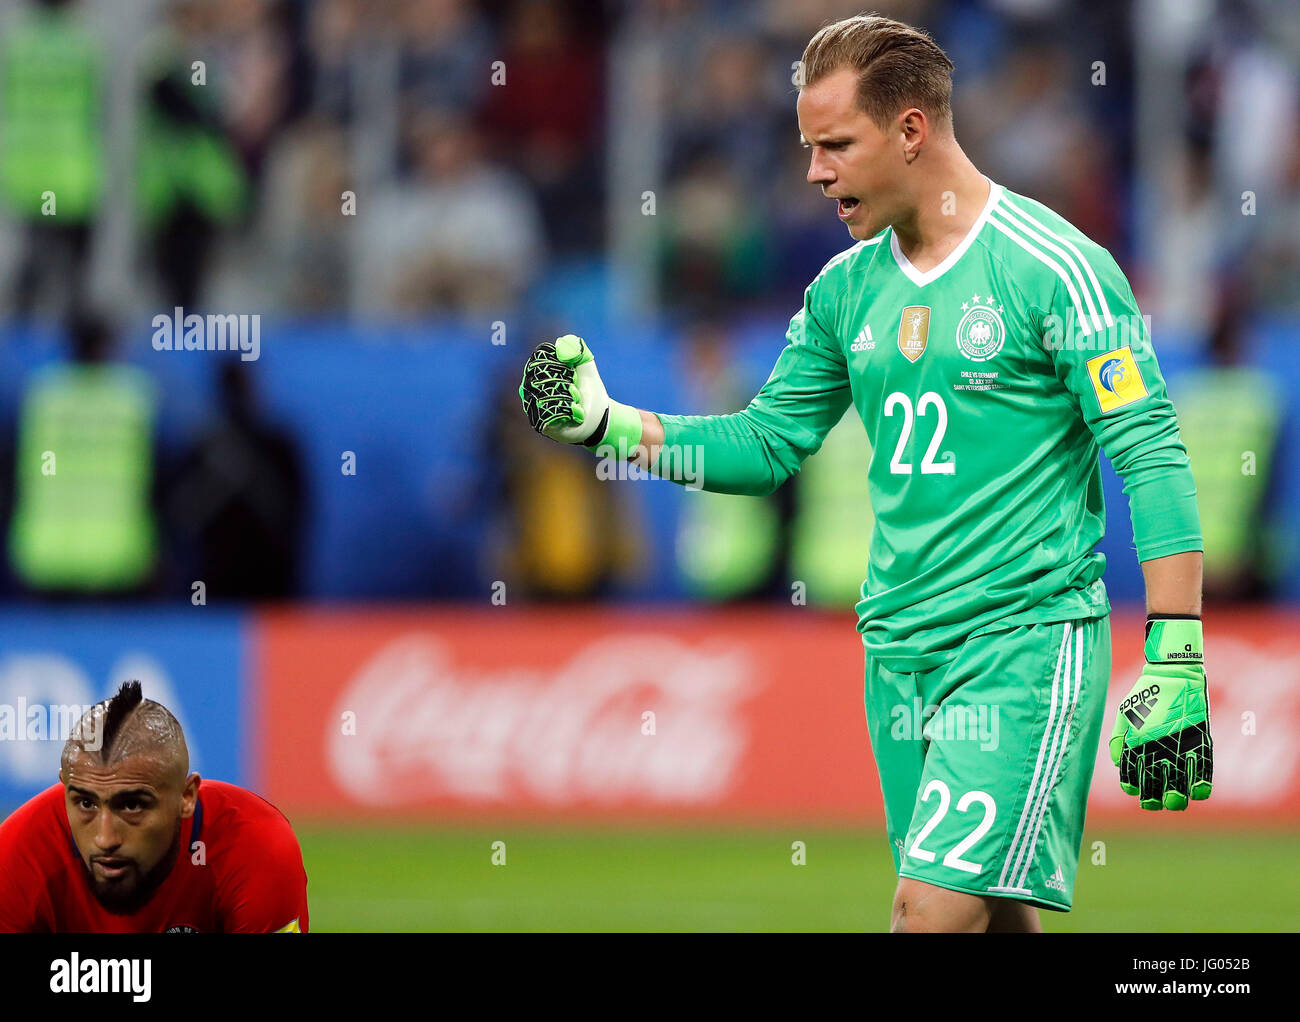 St. Petersburg, Russia. 2nd July, 2017. Marc-Andre TER STEGEN of Germany celebrates the title in front of Arturo VIDAL of Chile during a match between Chile and Germany valid for the final of the Confederations Cup 2017 on Sunday (2), held at the Krestovsky Stadium (Arena Zenit) in St. Petersburg, in Russia. (Photo: Rodolfo Buhrer/La Imagem/Fotoarena) Stock Photo